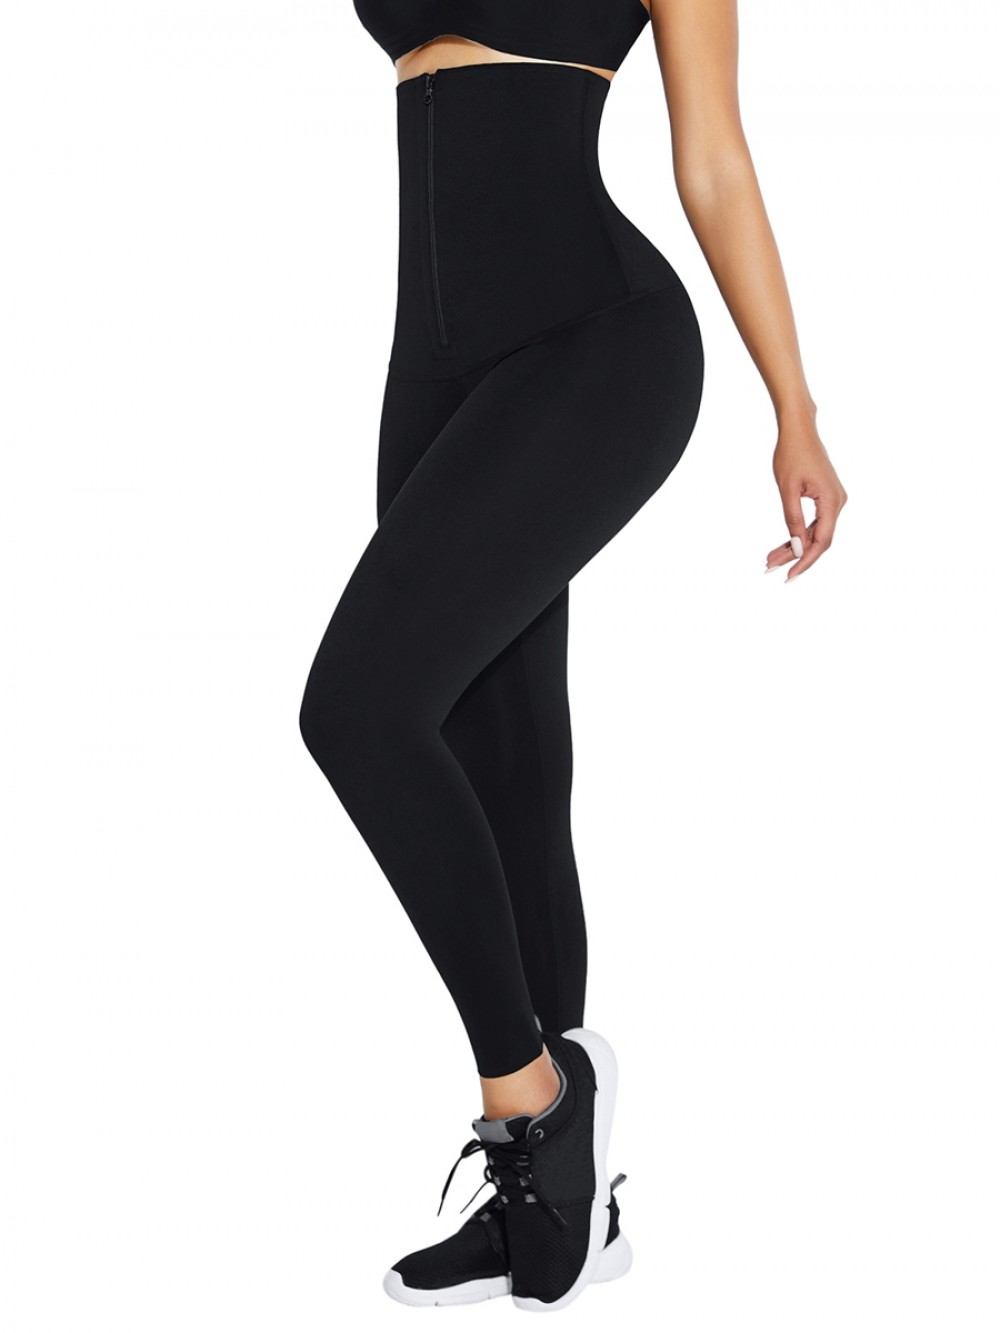 Black Waist Trainer 2-In-1 Leggings With Zipping Firm Compression